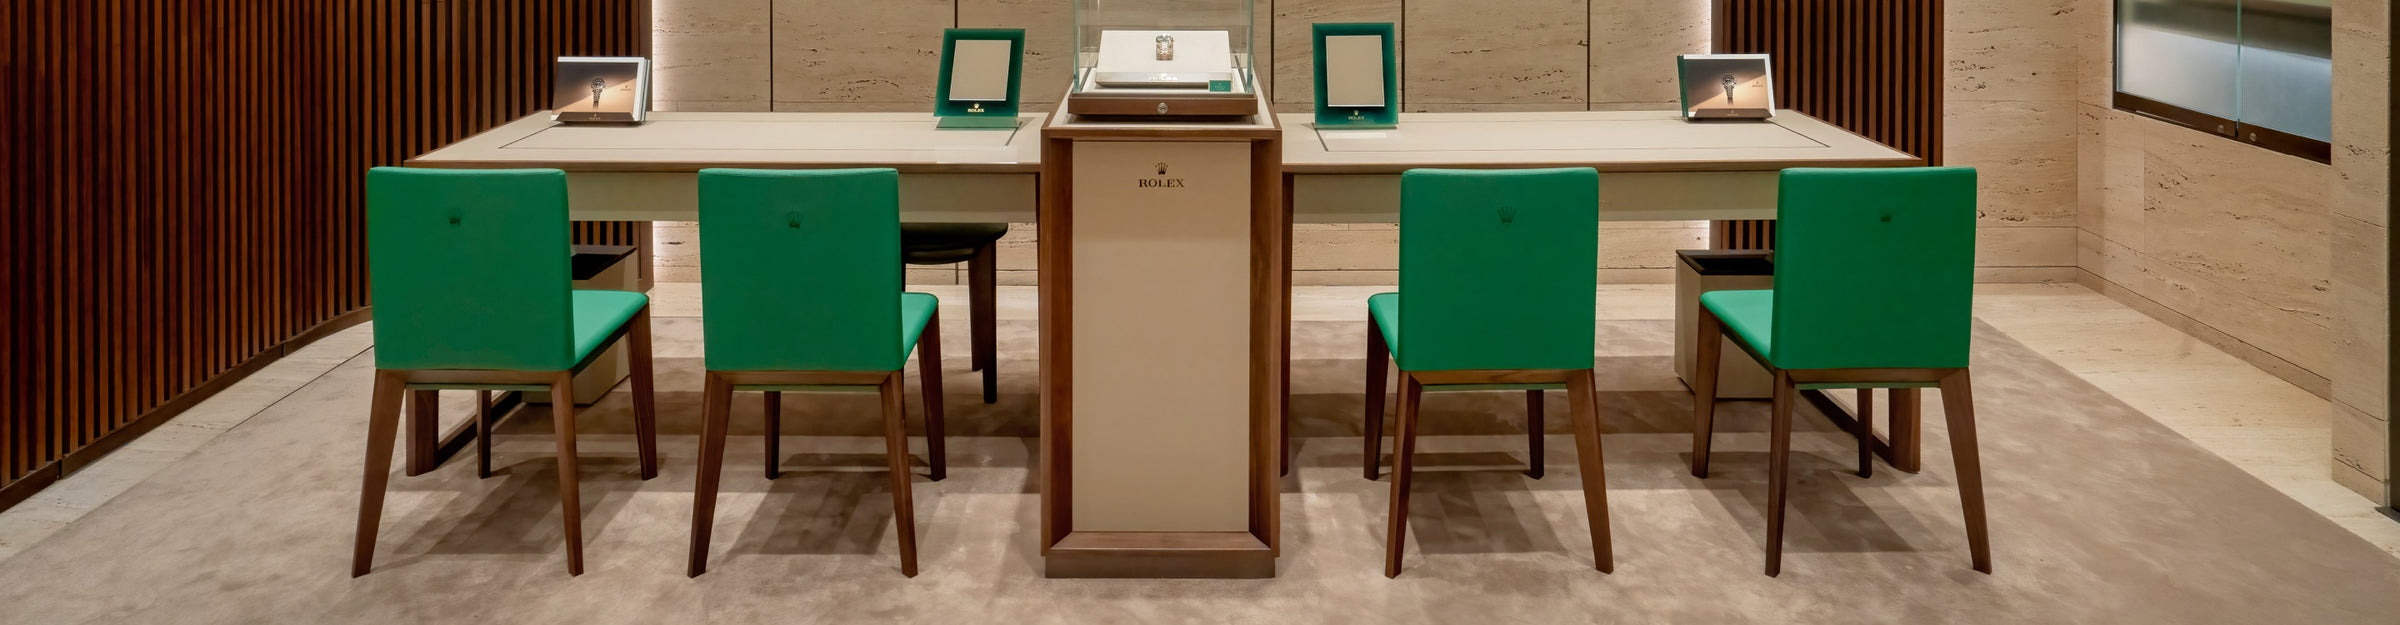 discover our luxury rolex showroom - Deacon & Son